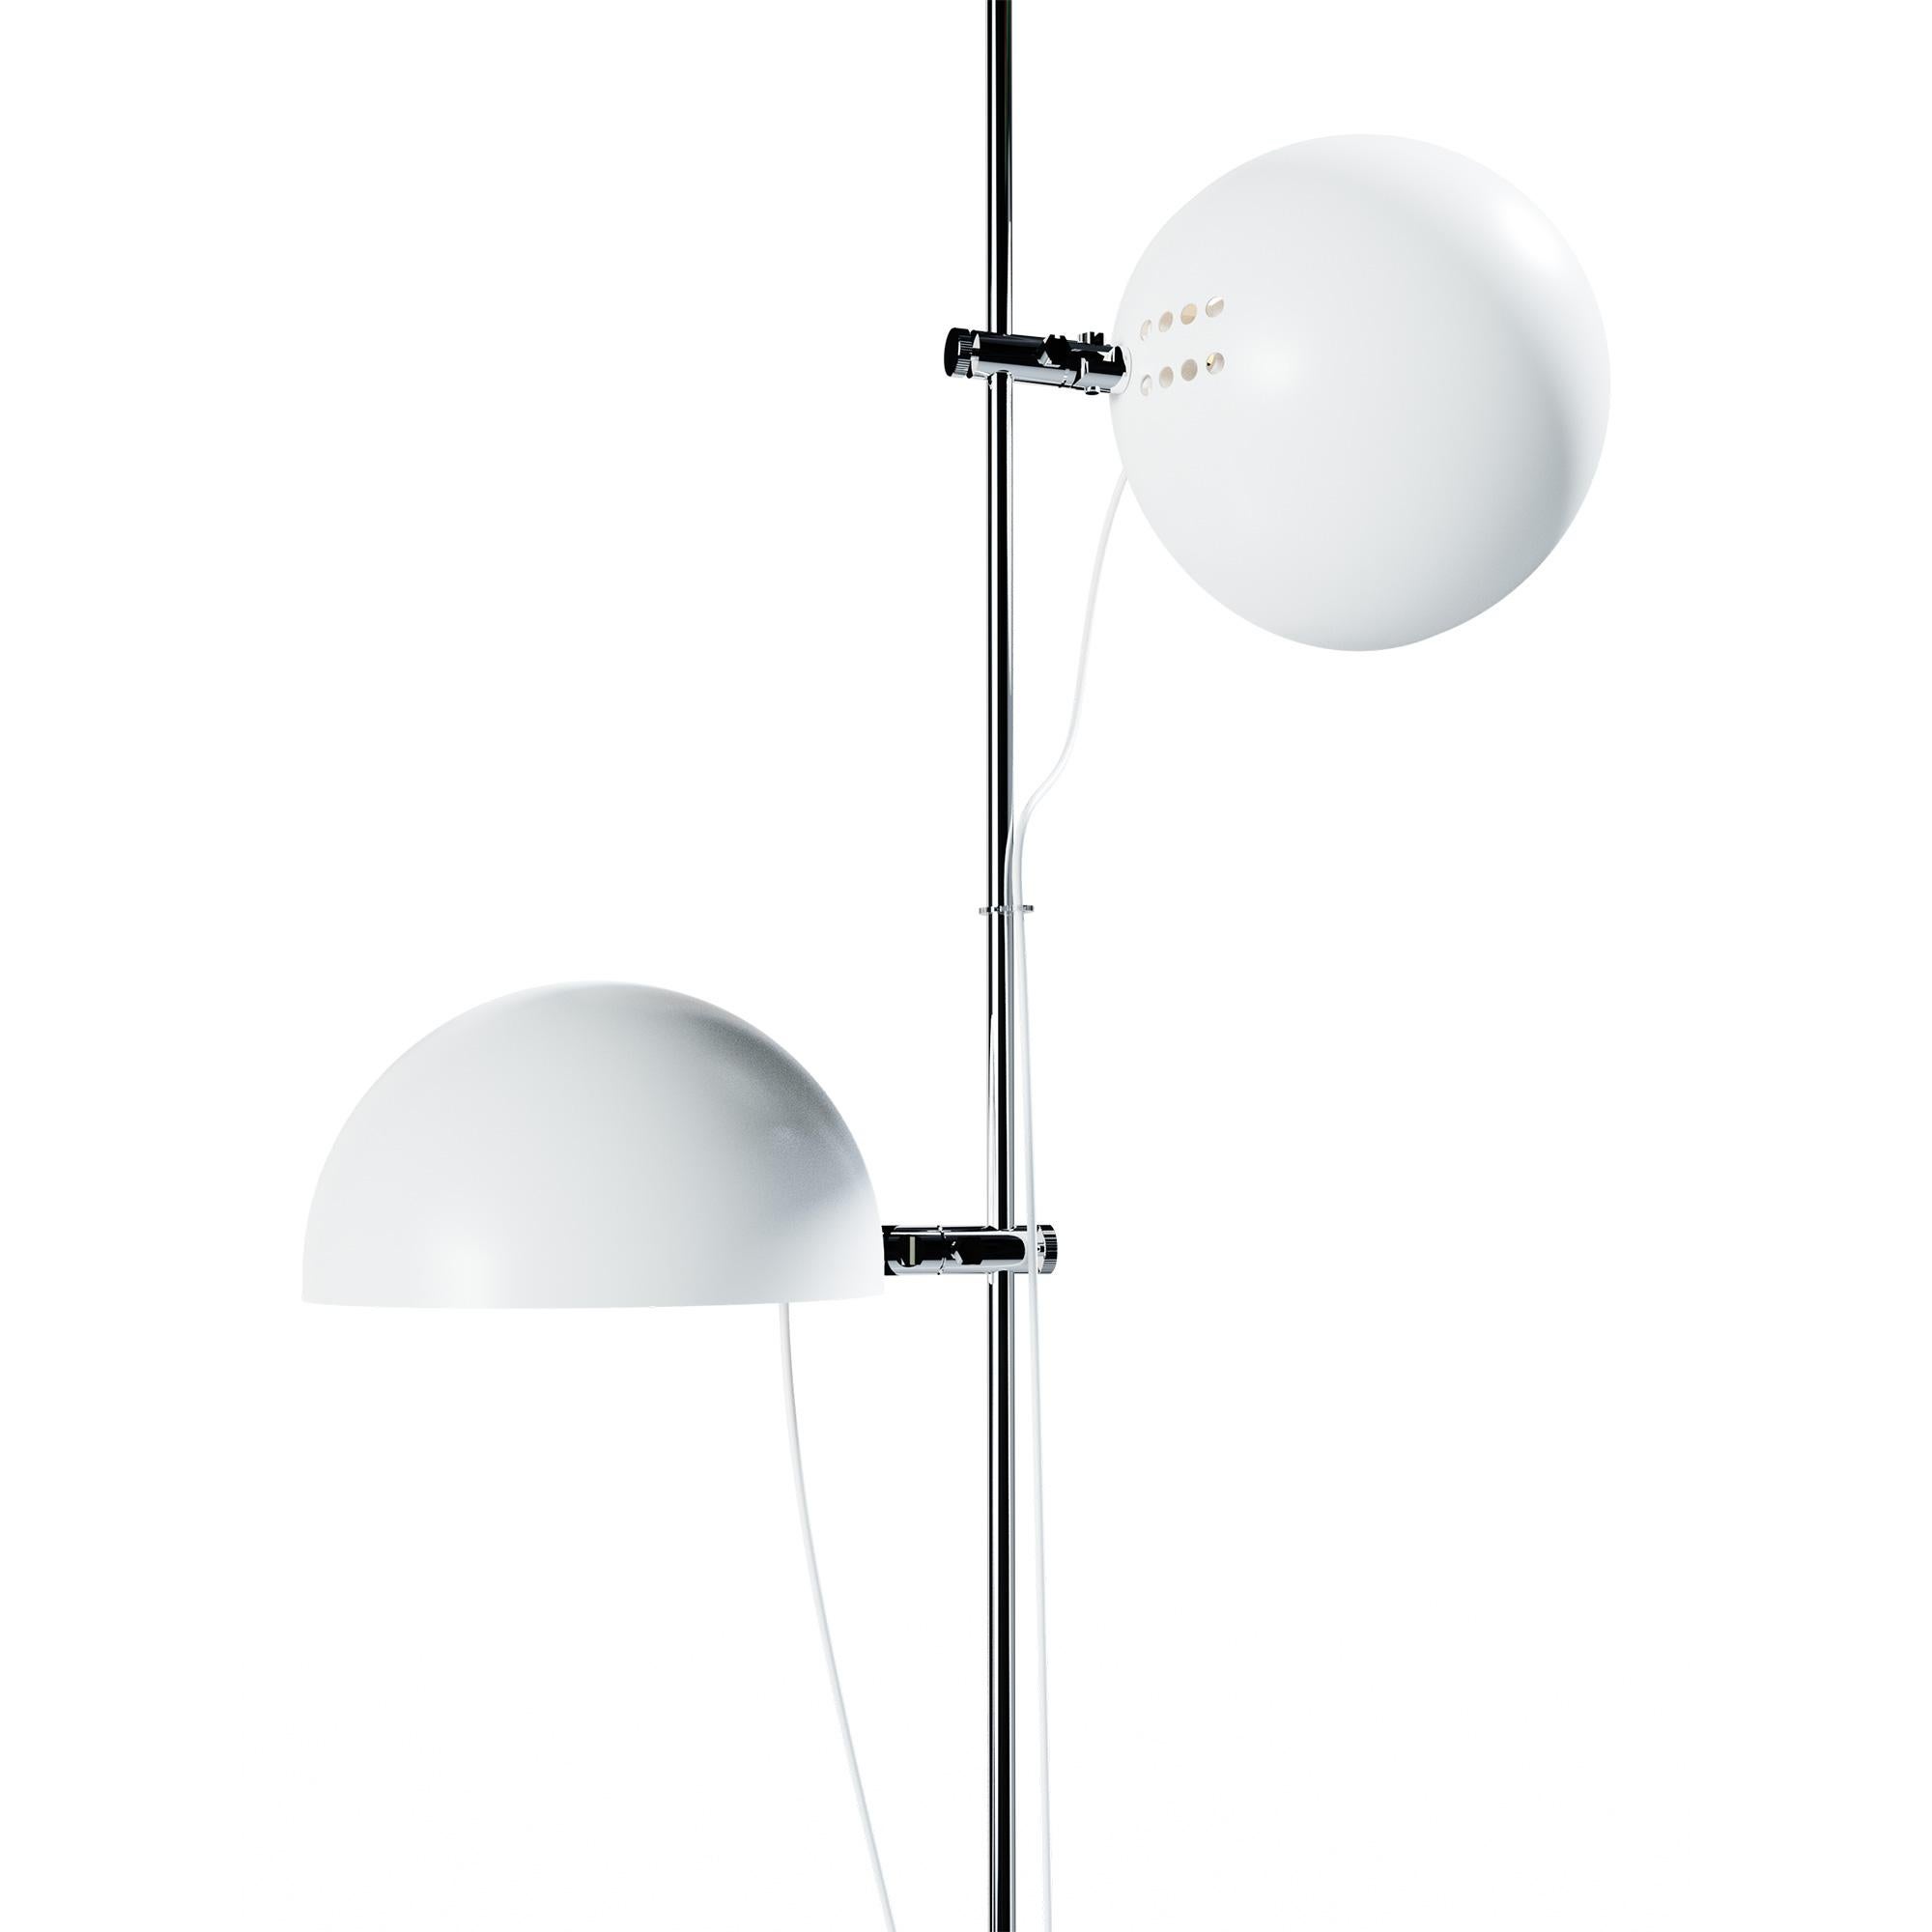 Alain Richard 'A23' metal and marble floor lamp for Disderot in white.

Executed in white painted metal with a marble base, this newly produced numbered edition with included certificate of authenticity is made in France by Disderot with many of